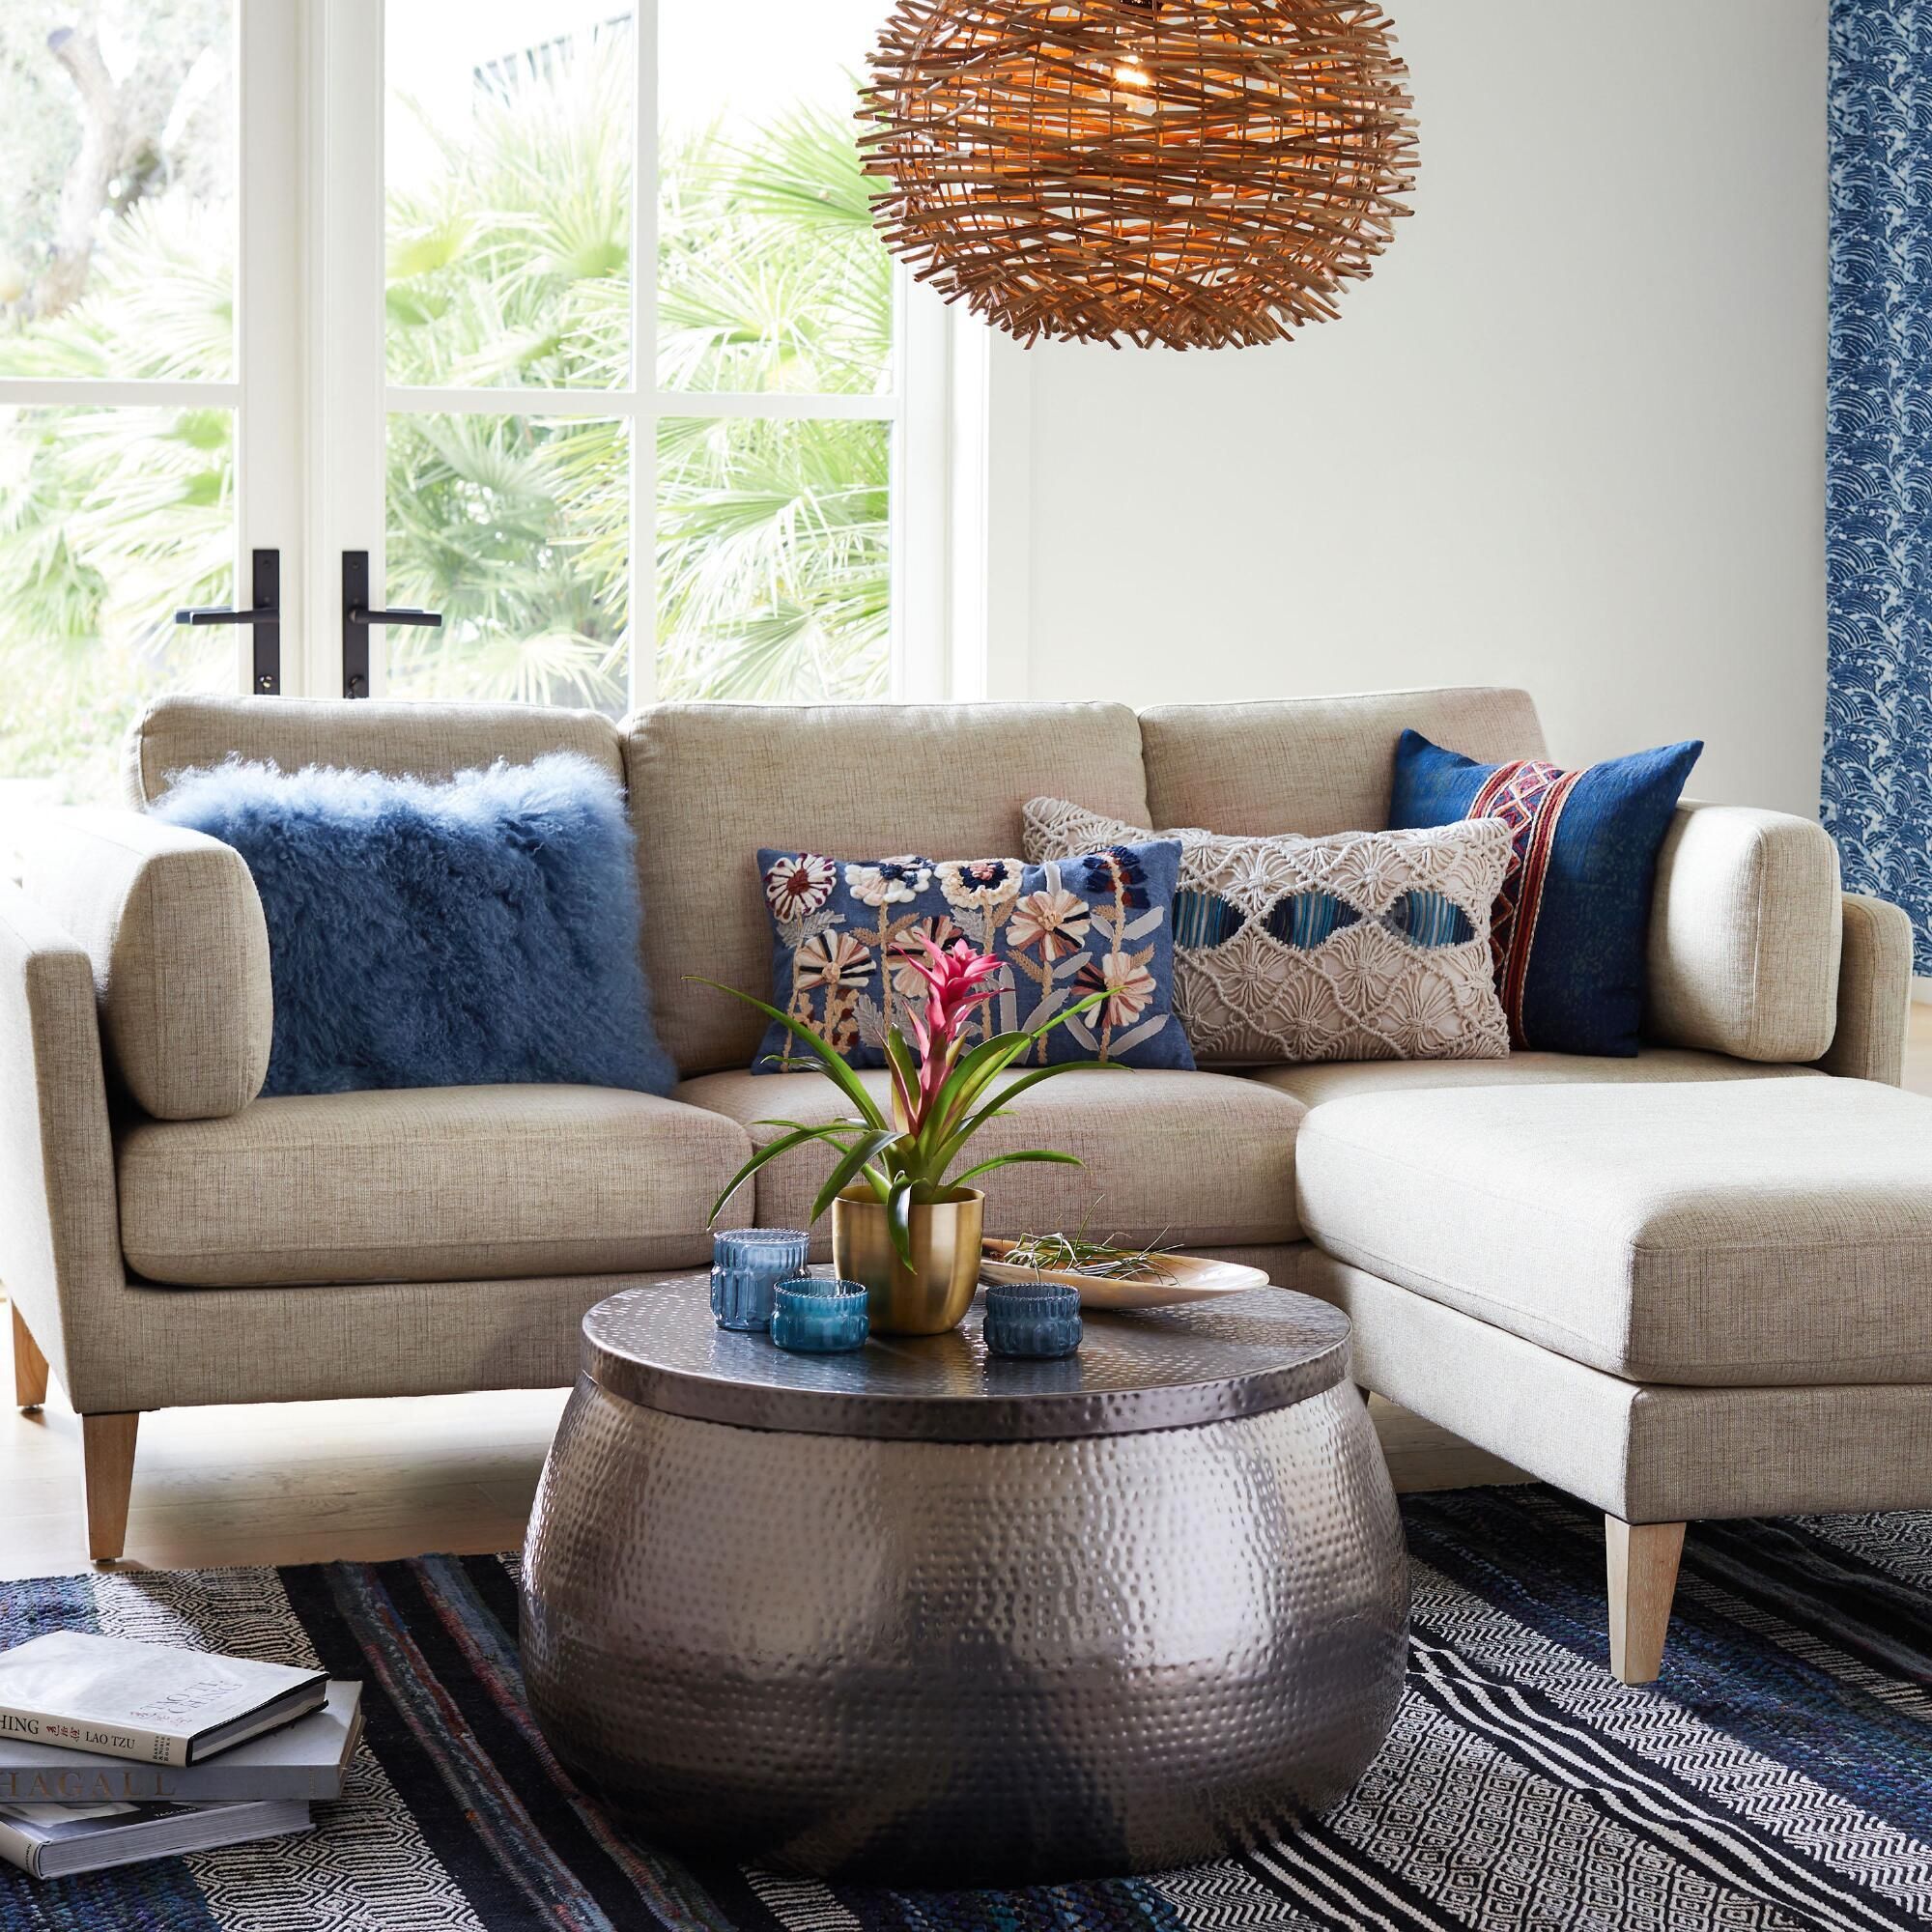 15 Best Modern Round Coffee Tables For Every Budget 2022 | Apartment Therapy In Circular Coffee Tables (View 20 of 20)